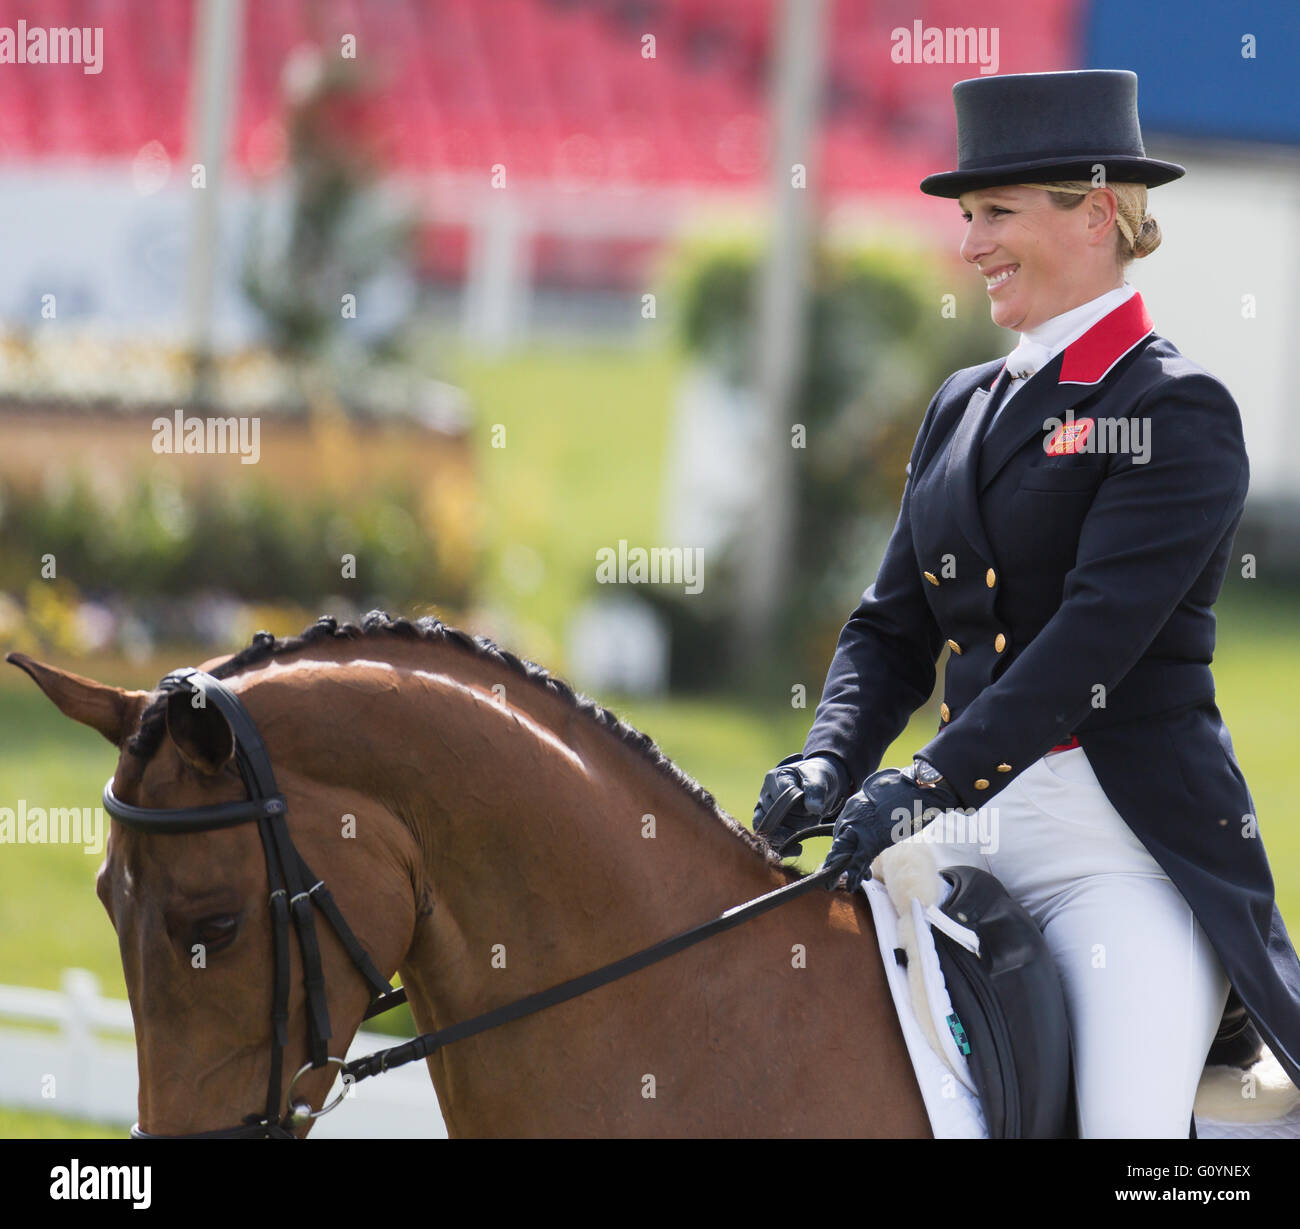 Badminton, South Gloucestershire, UK, 6th May 2016, Zara Tindall and her horse High Kingdom take part in the dressage phase at the Mitsubishi Motors Badminton Horse Trials 2016. Dressage is an advanced form of riding that tests the horse and rider as they perform difficult manoeuvres based around a horse's natural movements. Credit: Trevor Holt / Alamy Live News Stock Photo